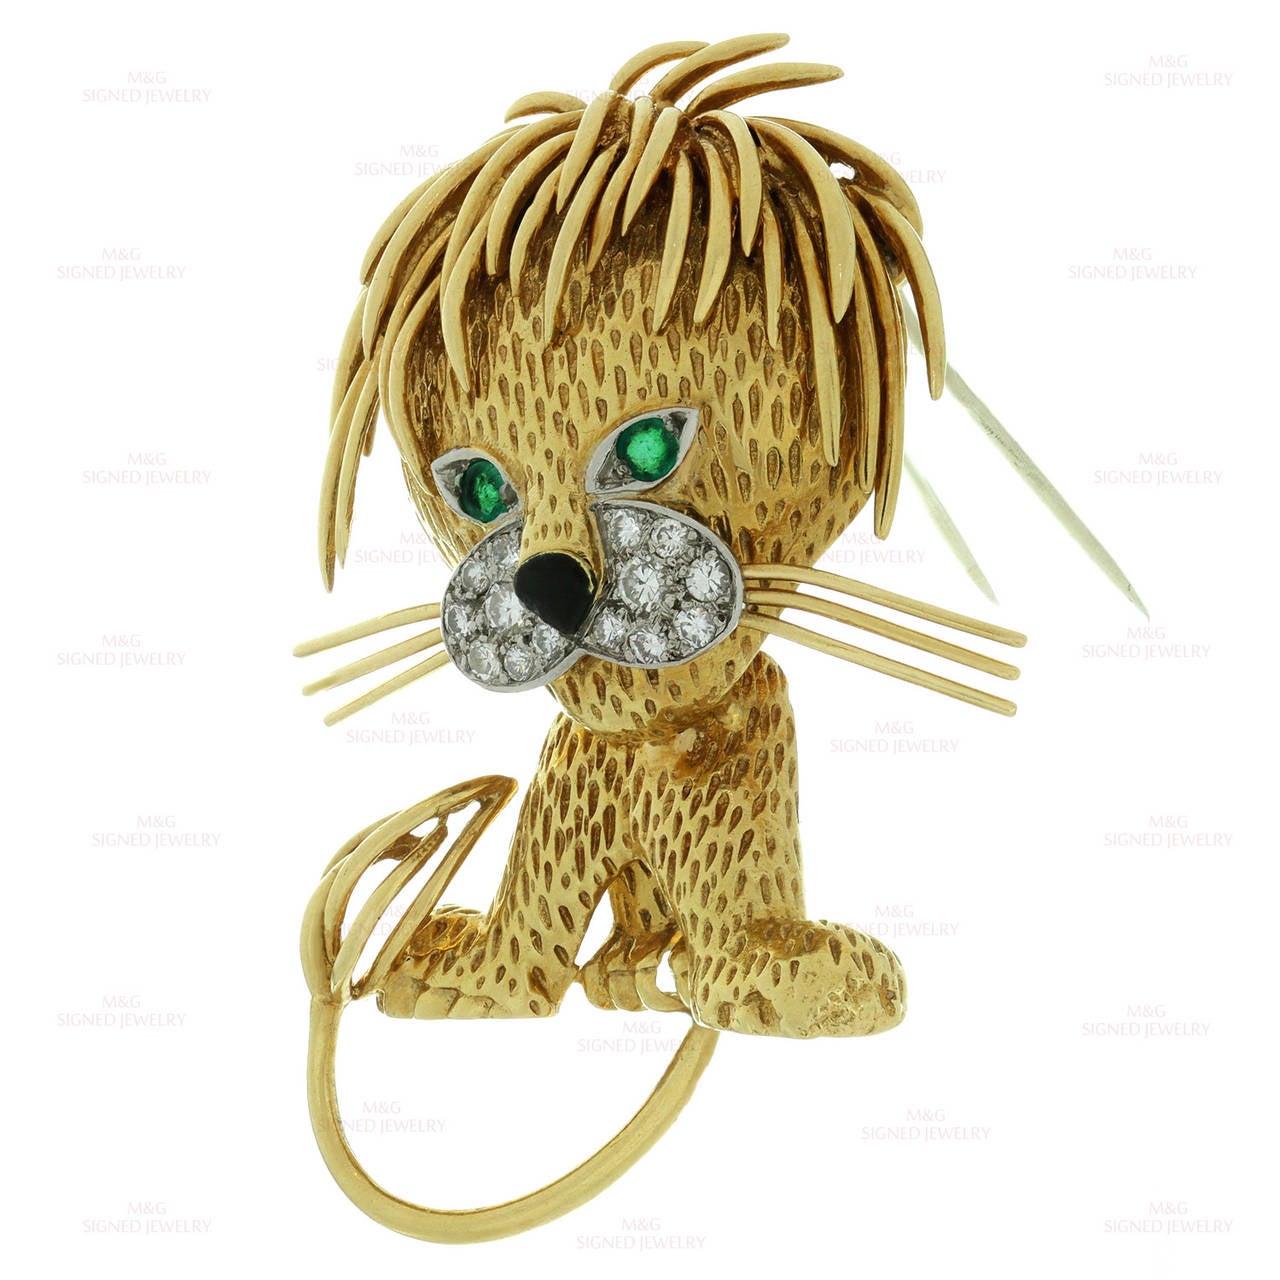 Be fearless with this iconic lion brooch from Van Cleef & Arpels. Beautifully made in 18k yellow gold and accented with an estimated 0.52 carats of F-G VS1-VS2 diamonds and green emerald eyes. With French assay mark. Circa 1962.